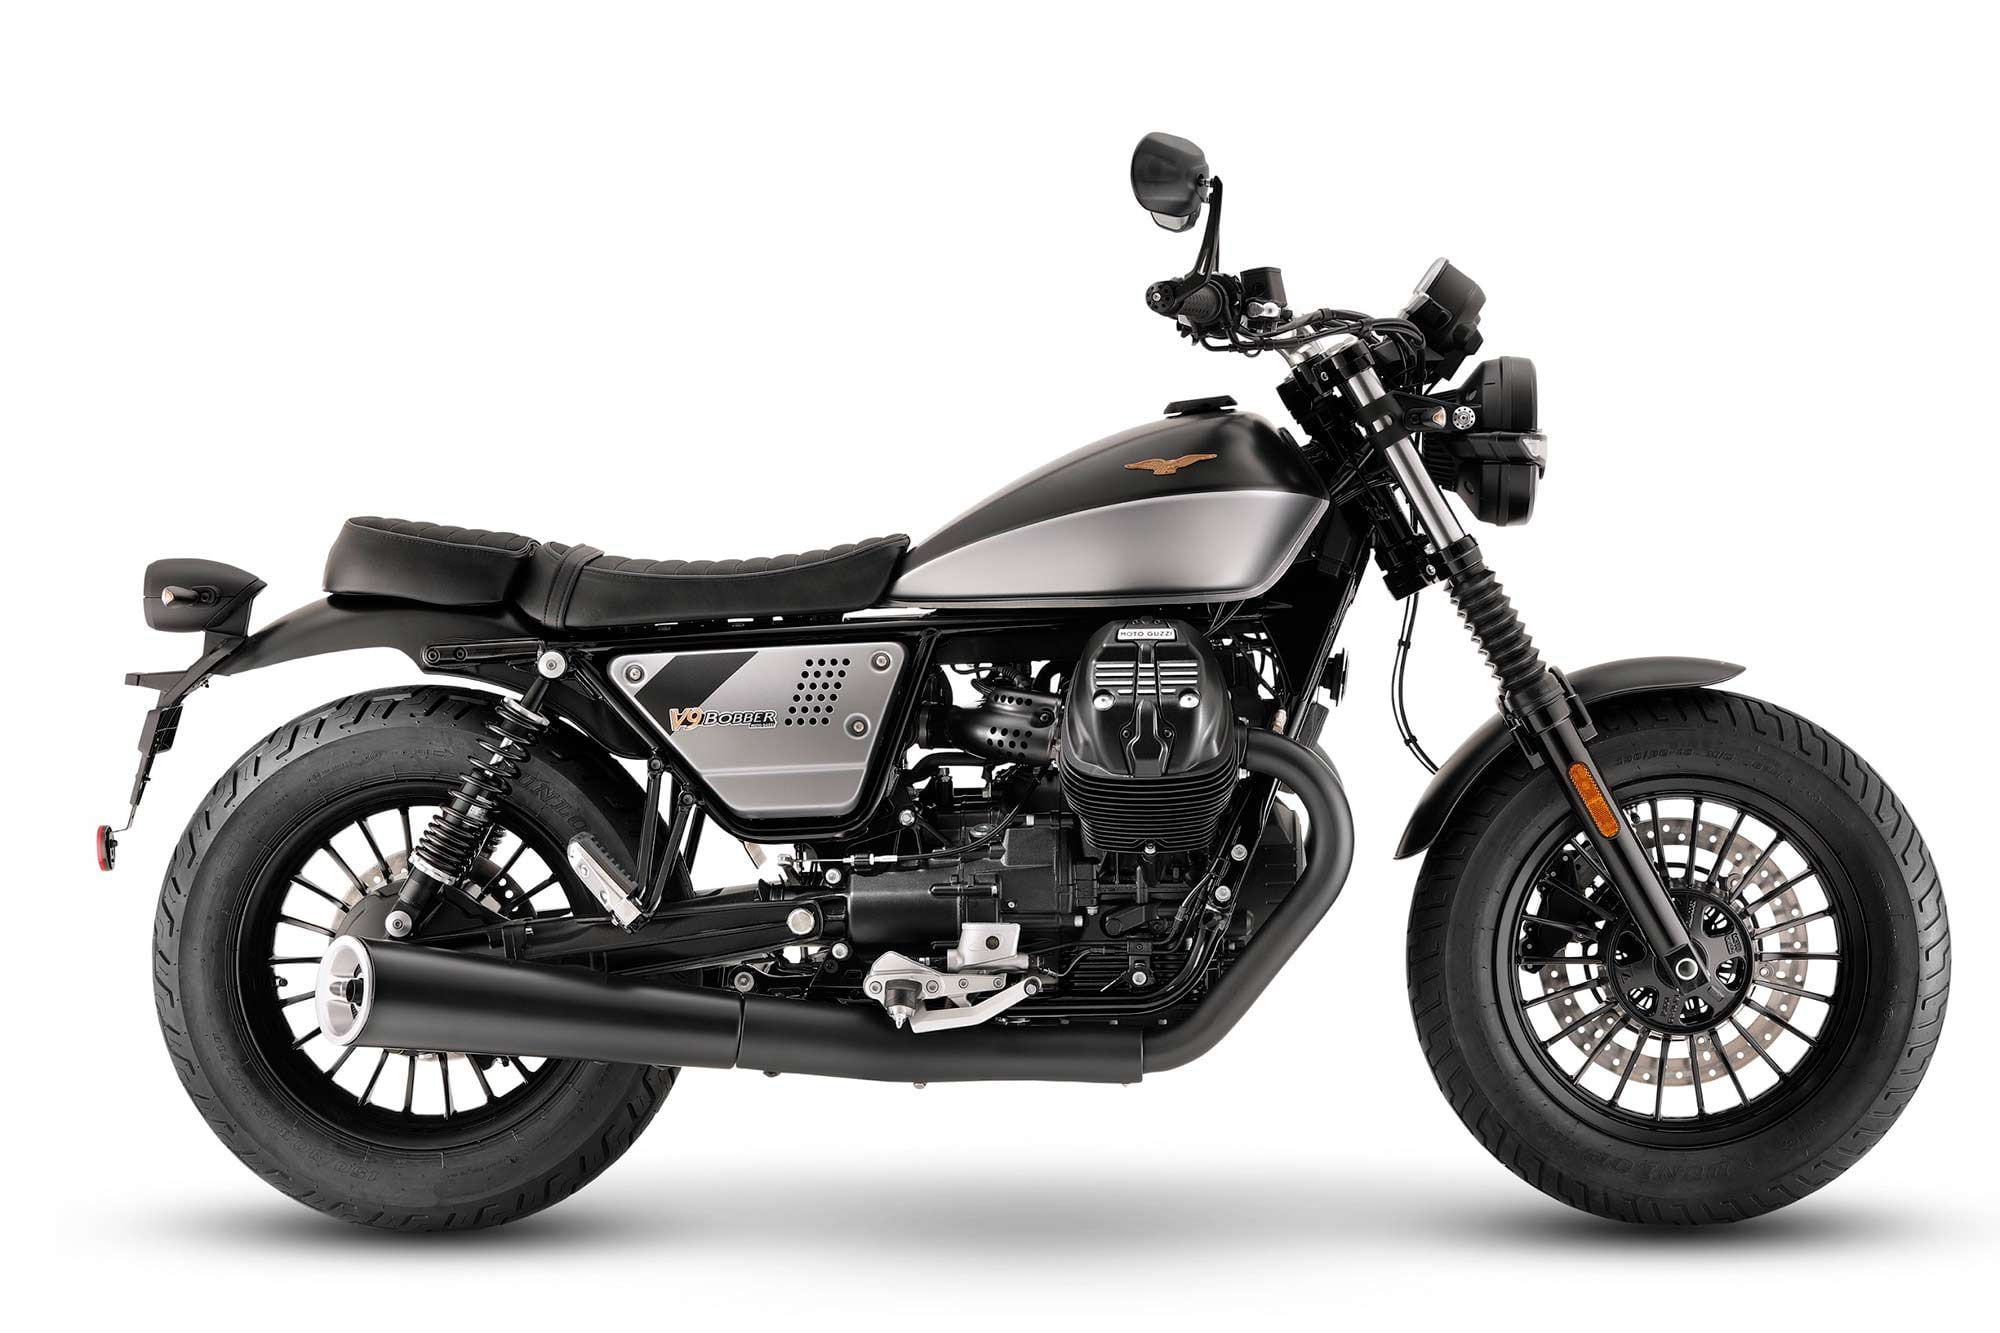 The Special Edition is based on the stock V9 Bobber, but this is primarily a cosmetic treat with no mechanical changes.